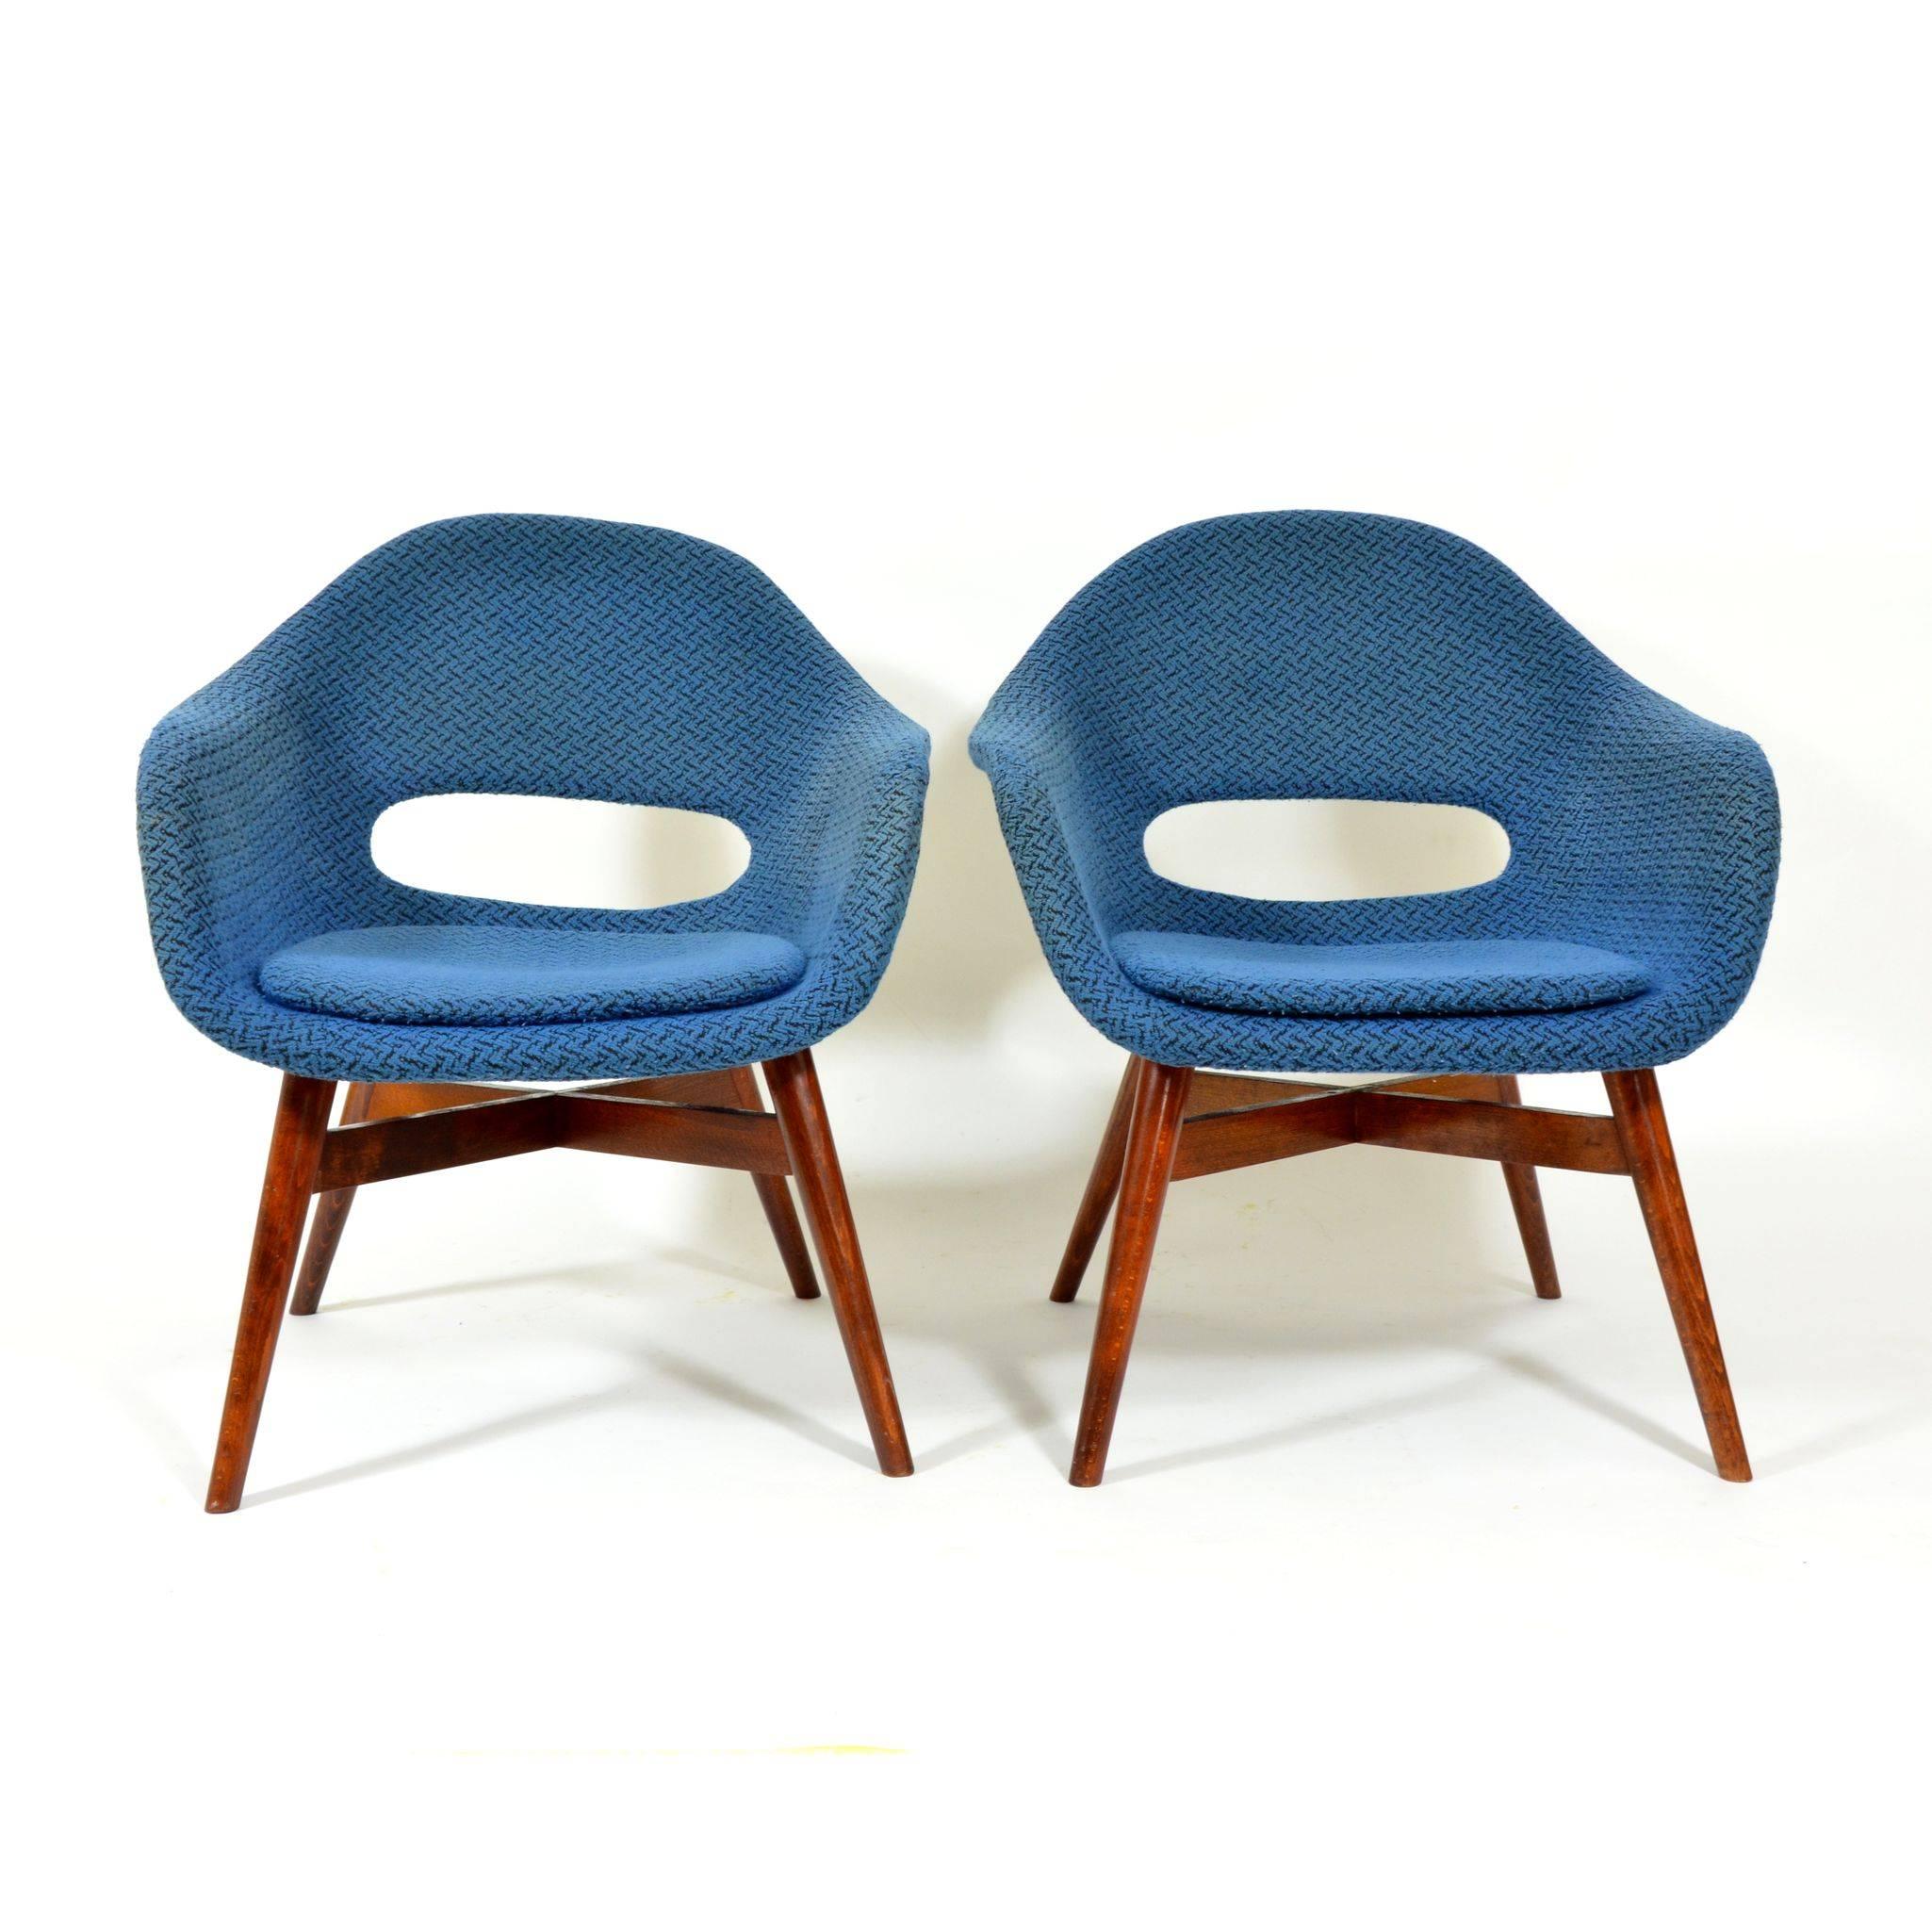 Very popular and design valued lounge chair by Miroslav Navrátil. Made of fiberglass shell, with original blue furniture fabric with visible structure. The wooden base made of stained beech is in original, very good, condition. Produced in former